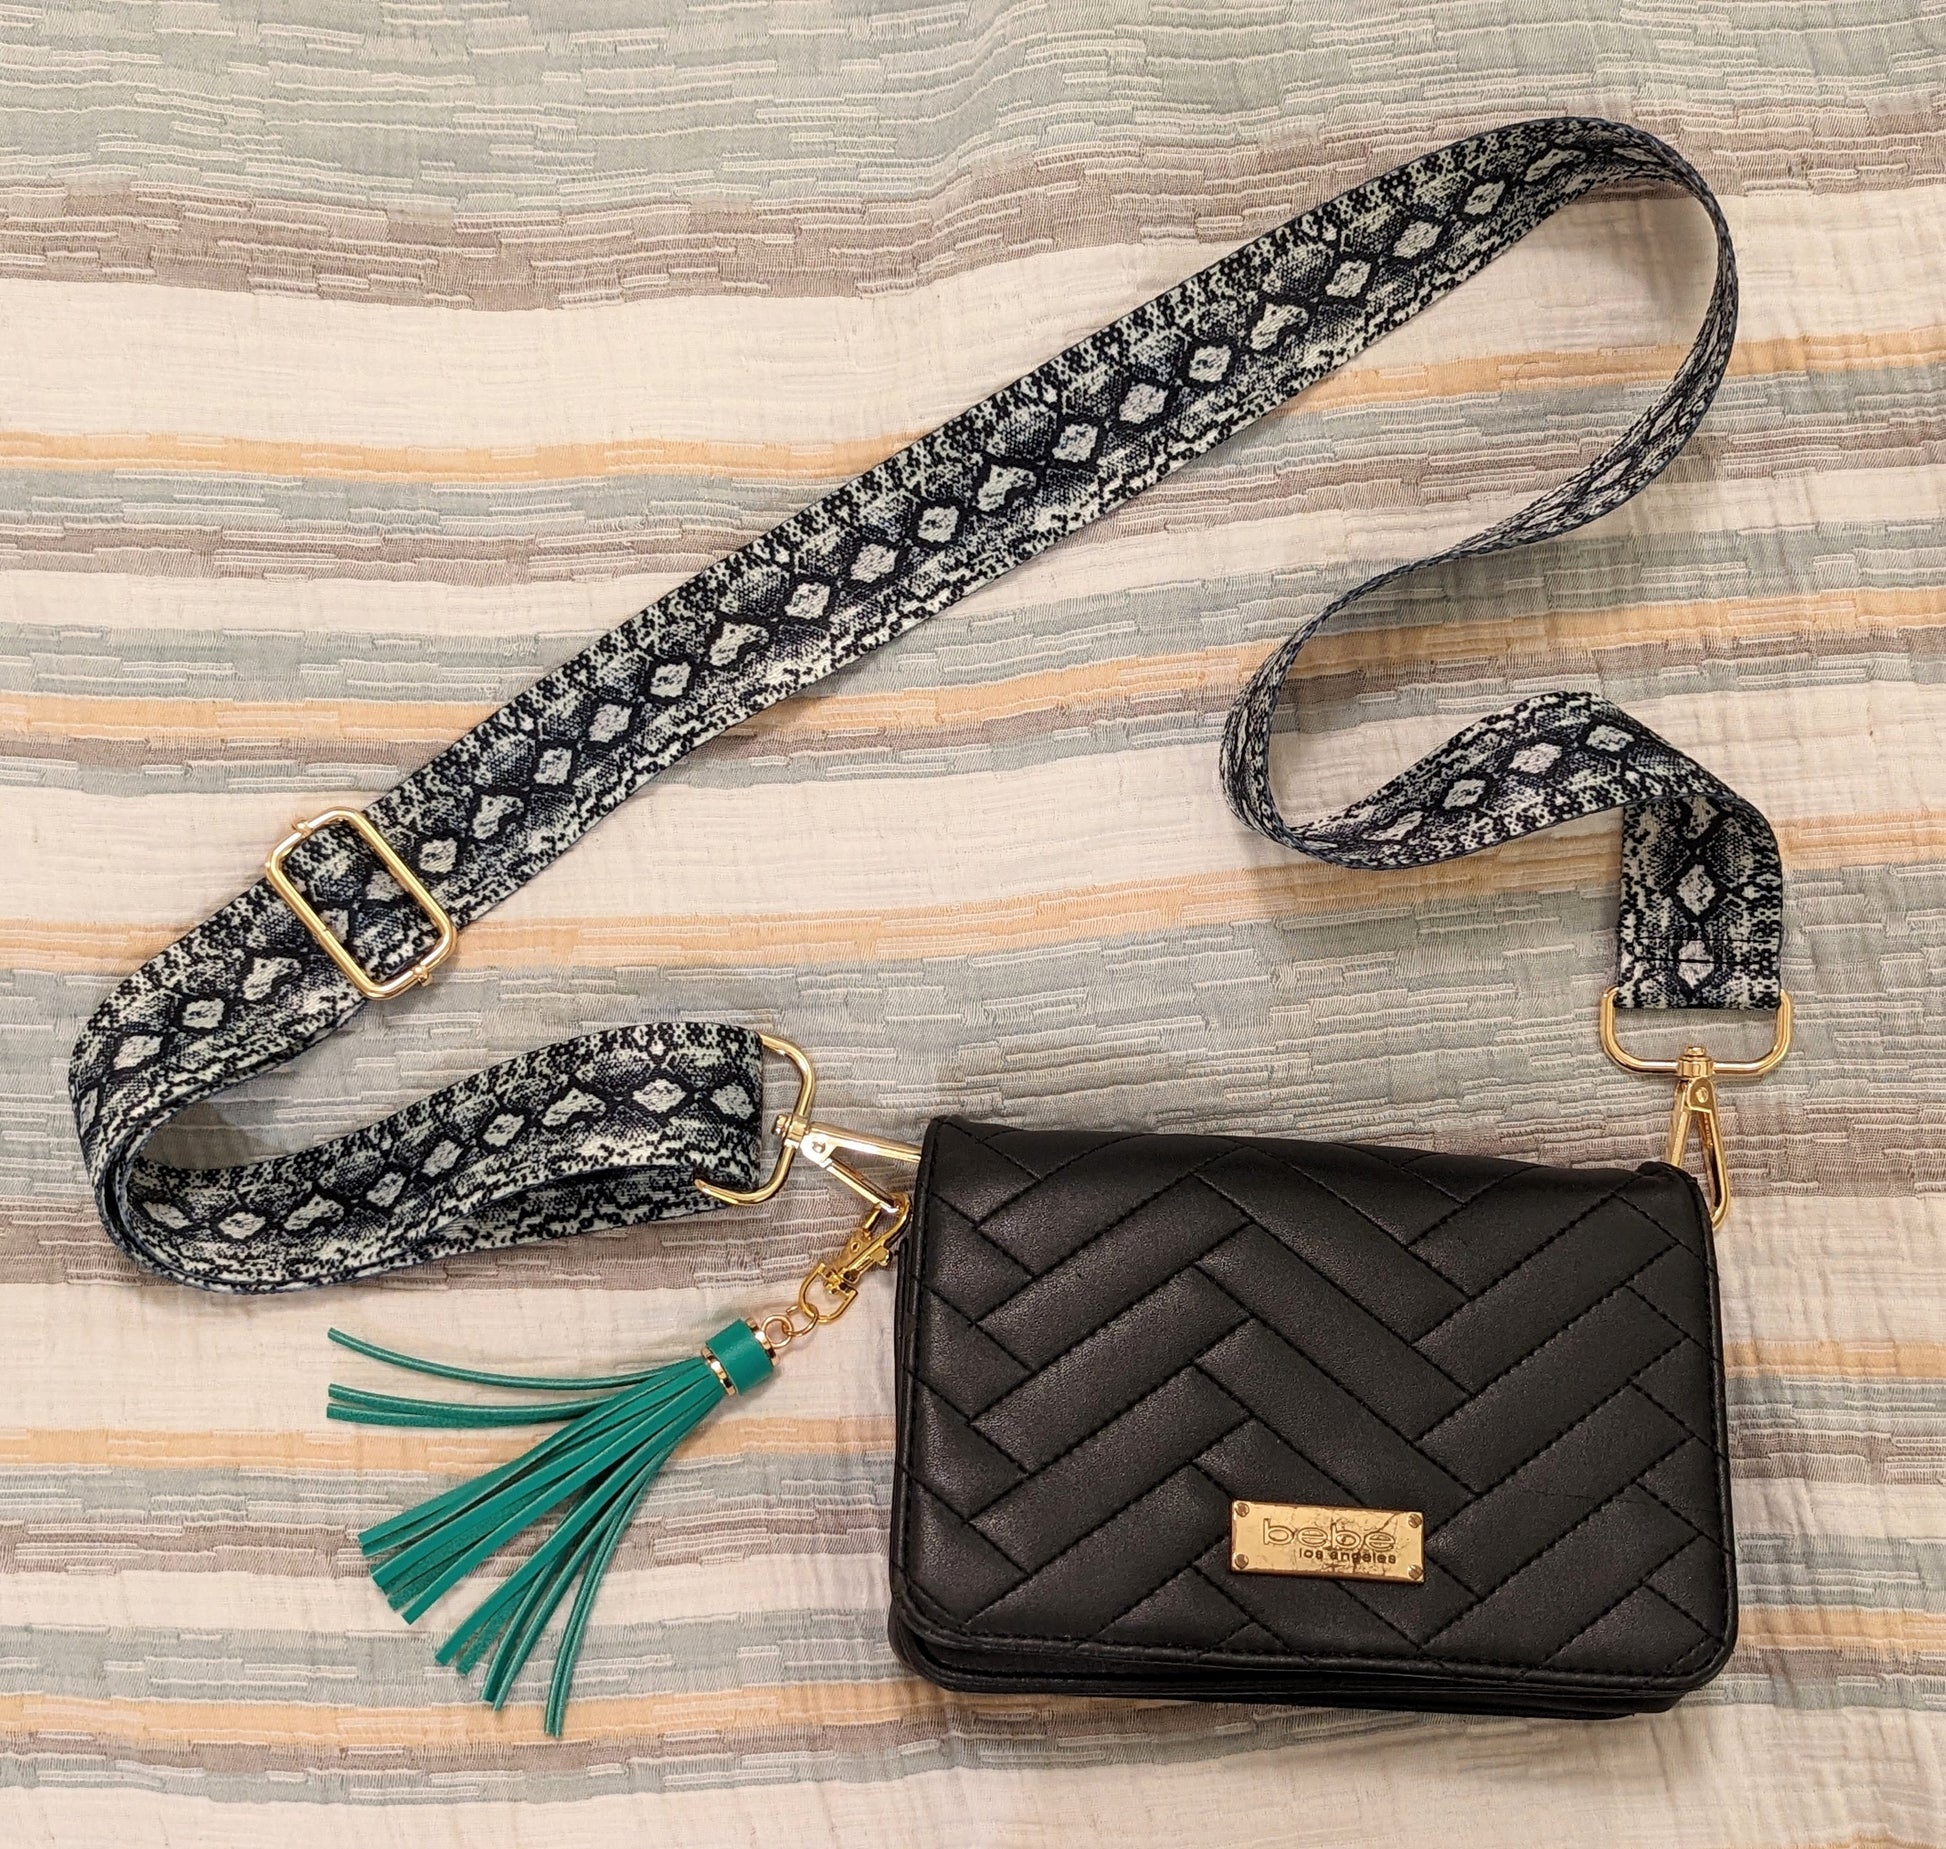 BeBe small black purse with snakeskin strap